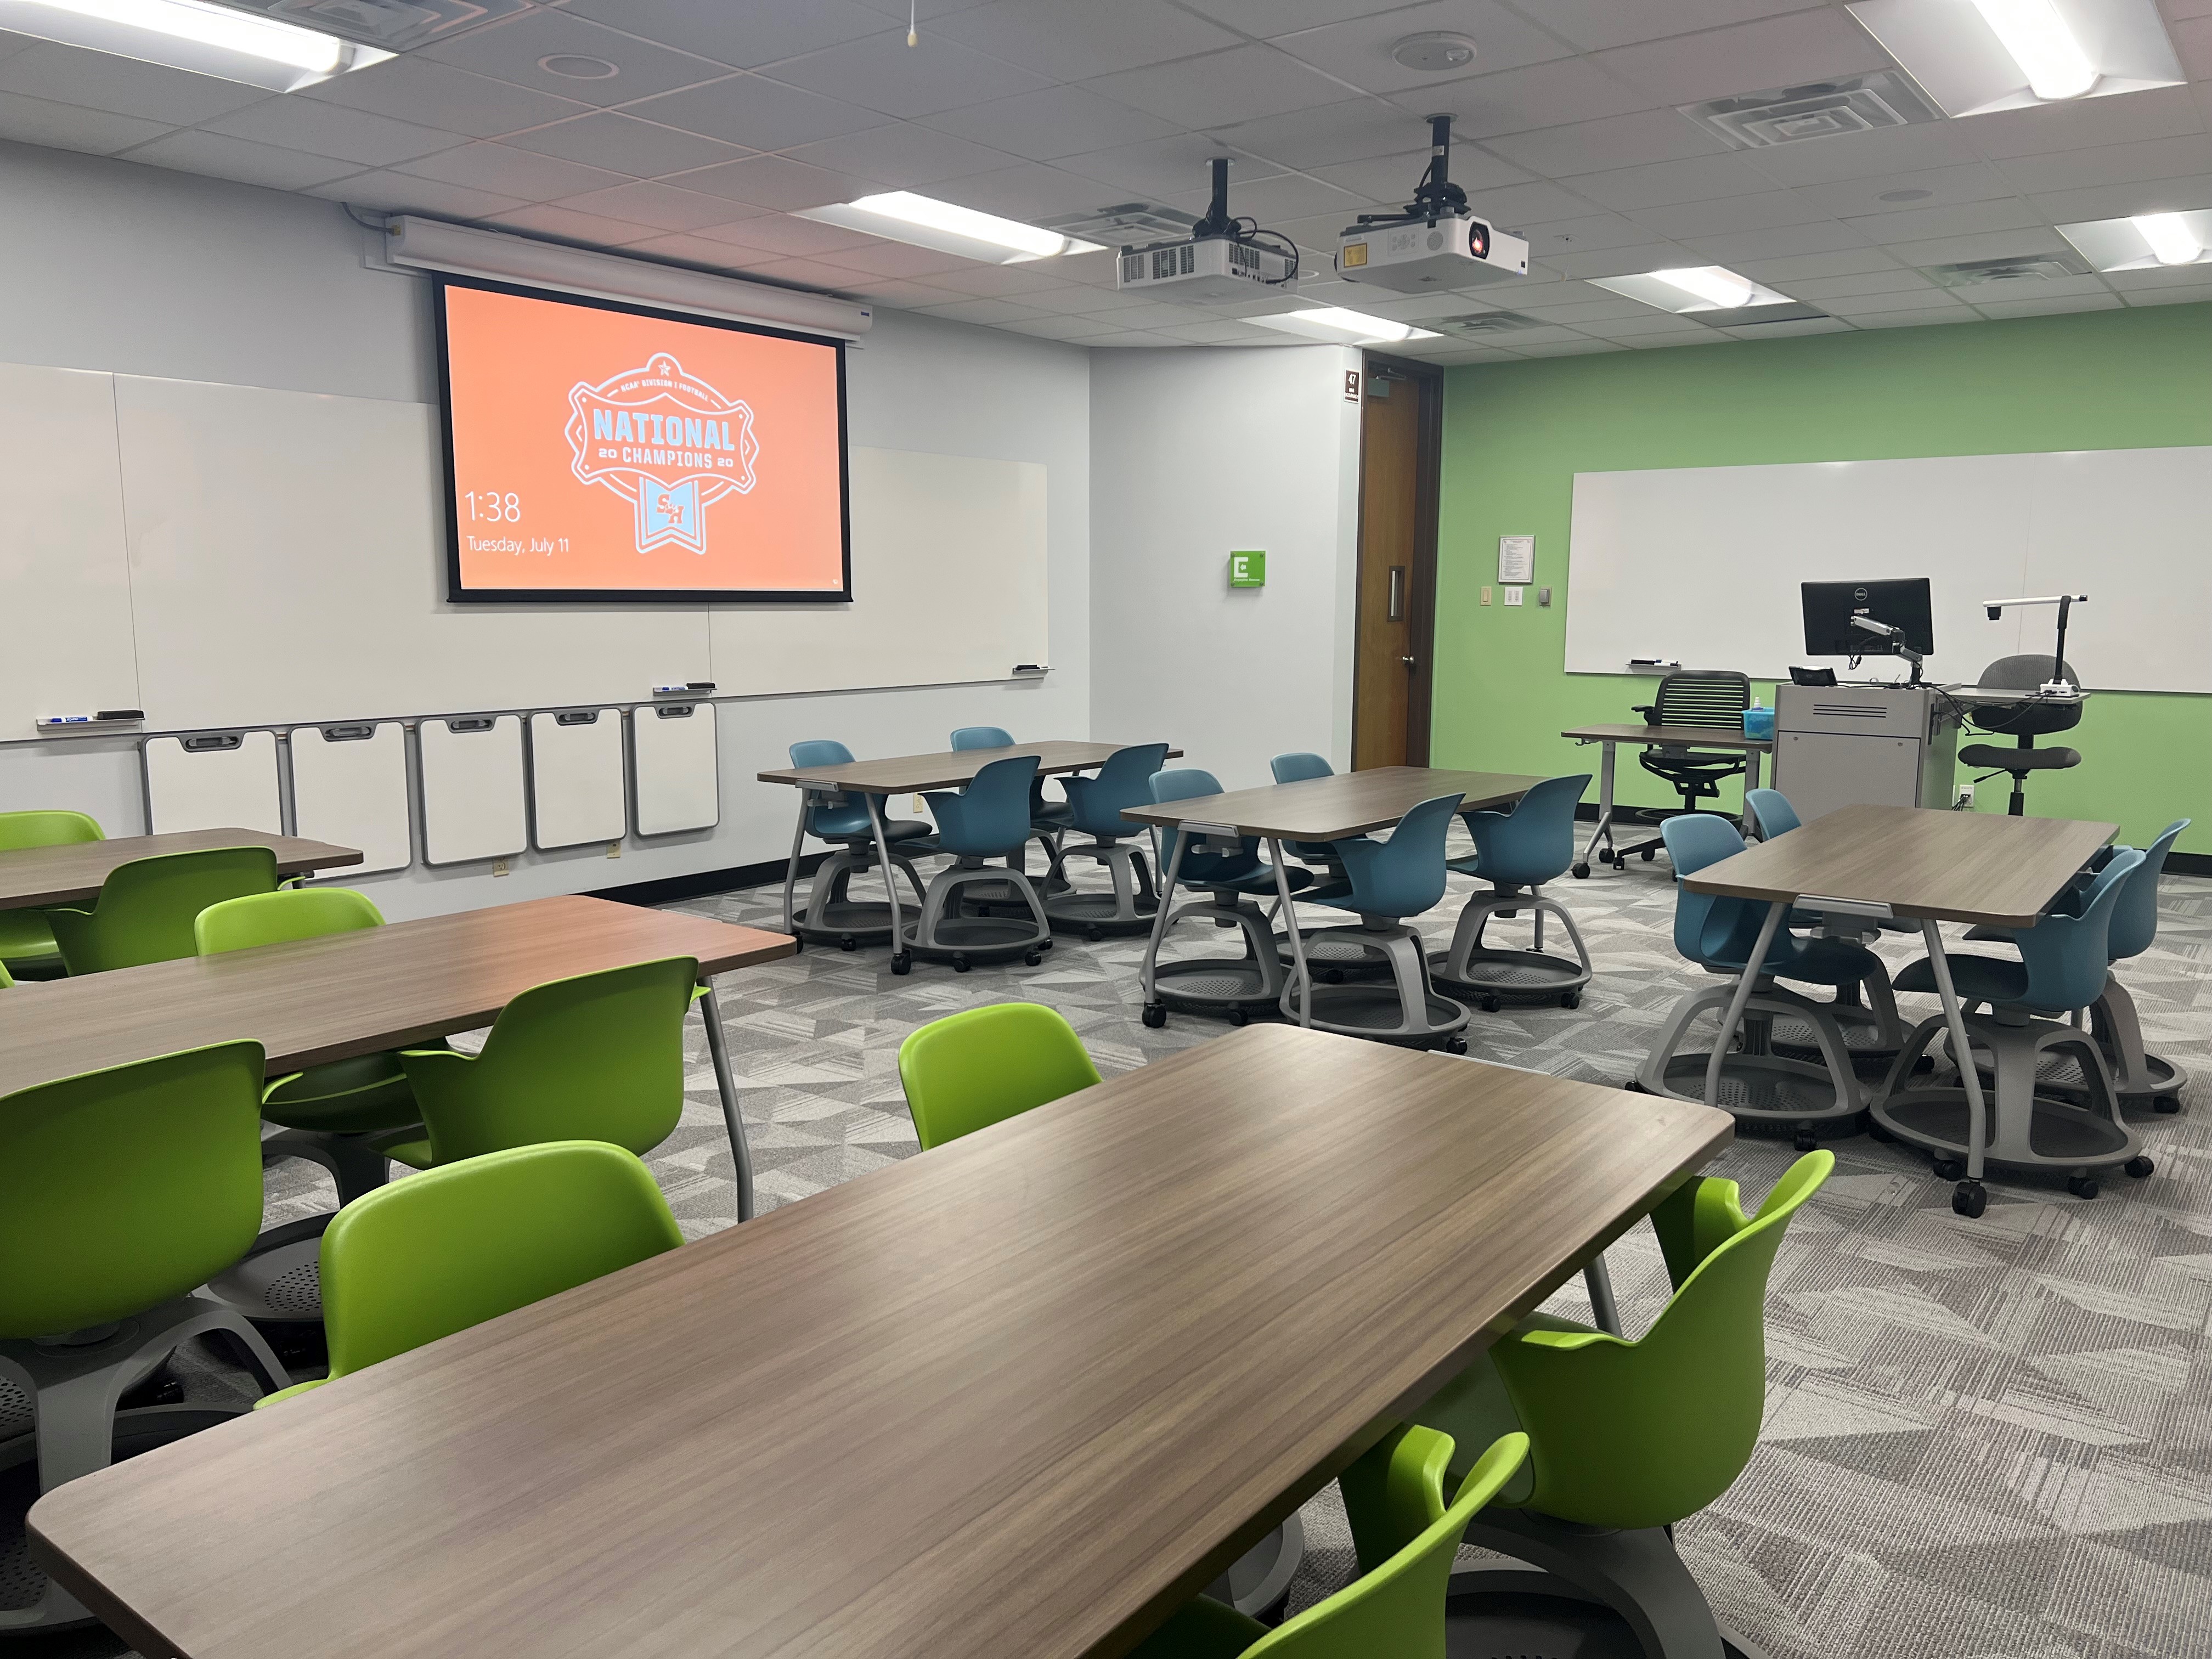 LDB 208, tables and chairs in a  classroom with a projector screen in the background.